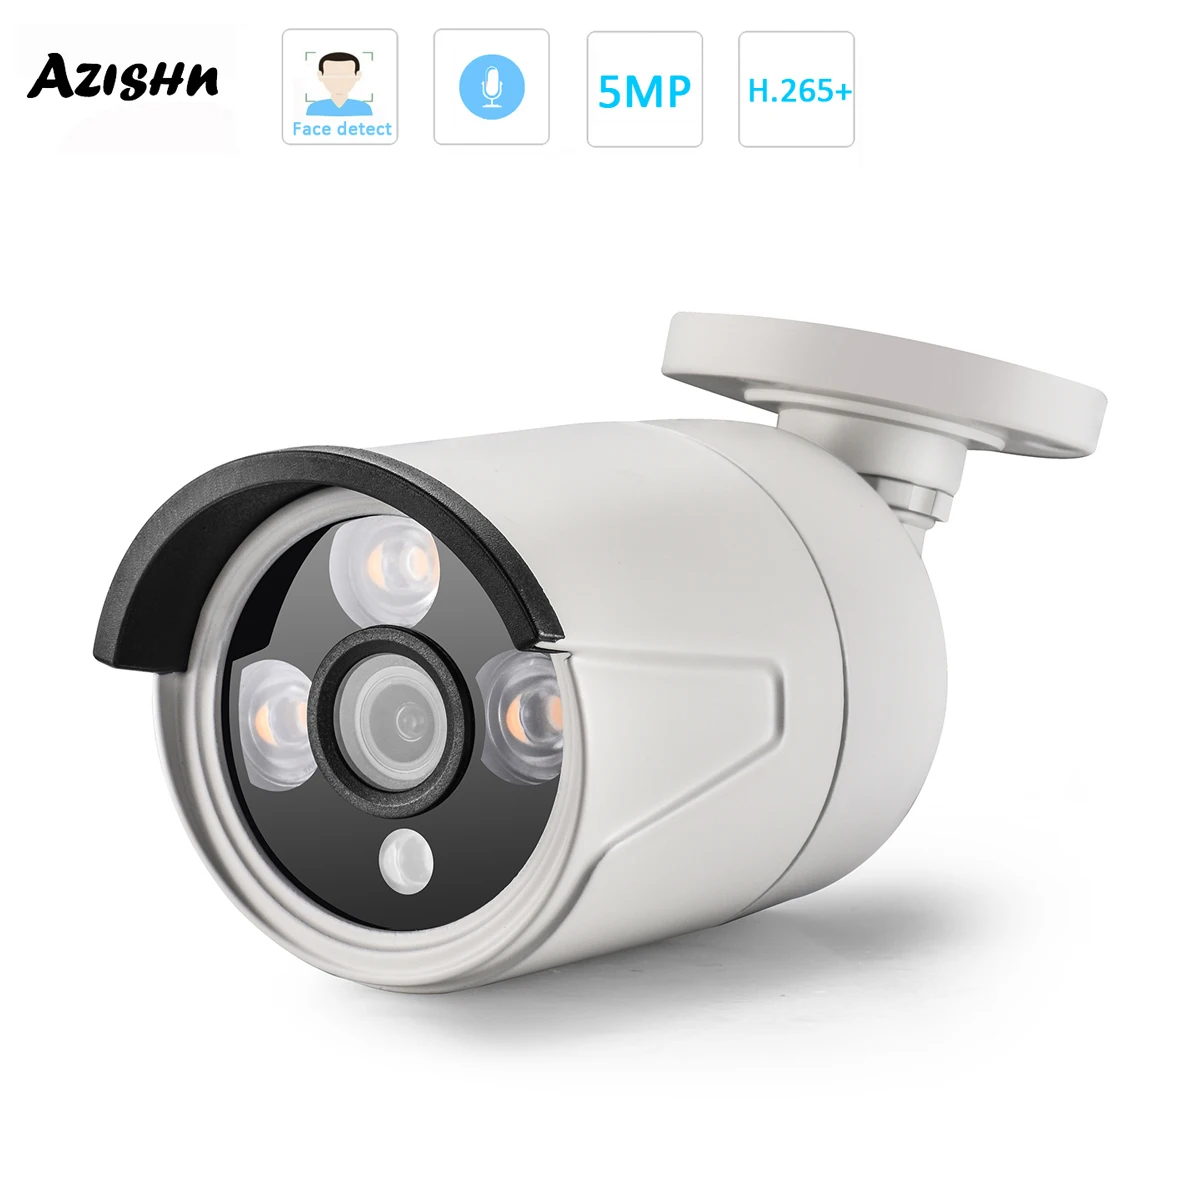 

AZISHN H.265+ 5MP SONY IMX335 POE IP Camera 2592X1944 Video Face Detection Outdoor IP66 3IR Array LEDS CCTV Security Cam